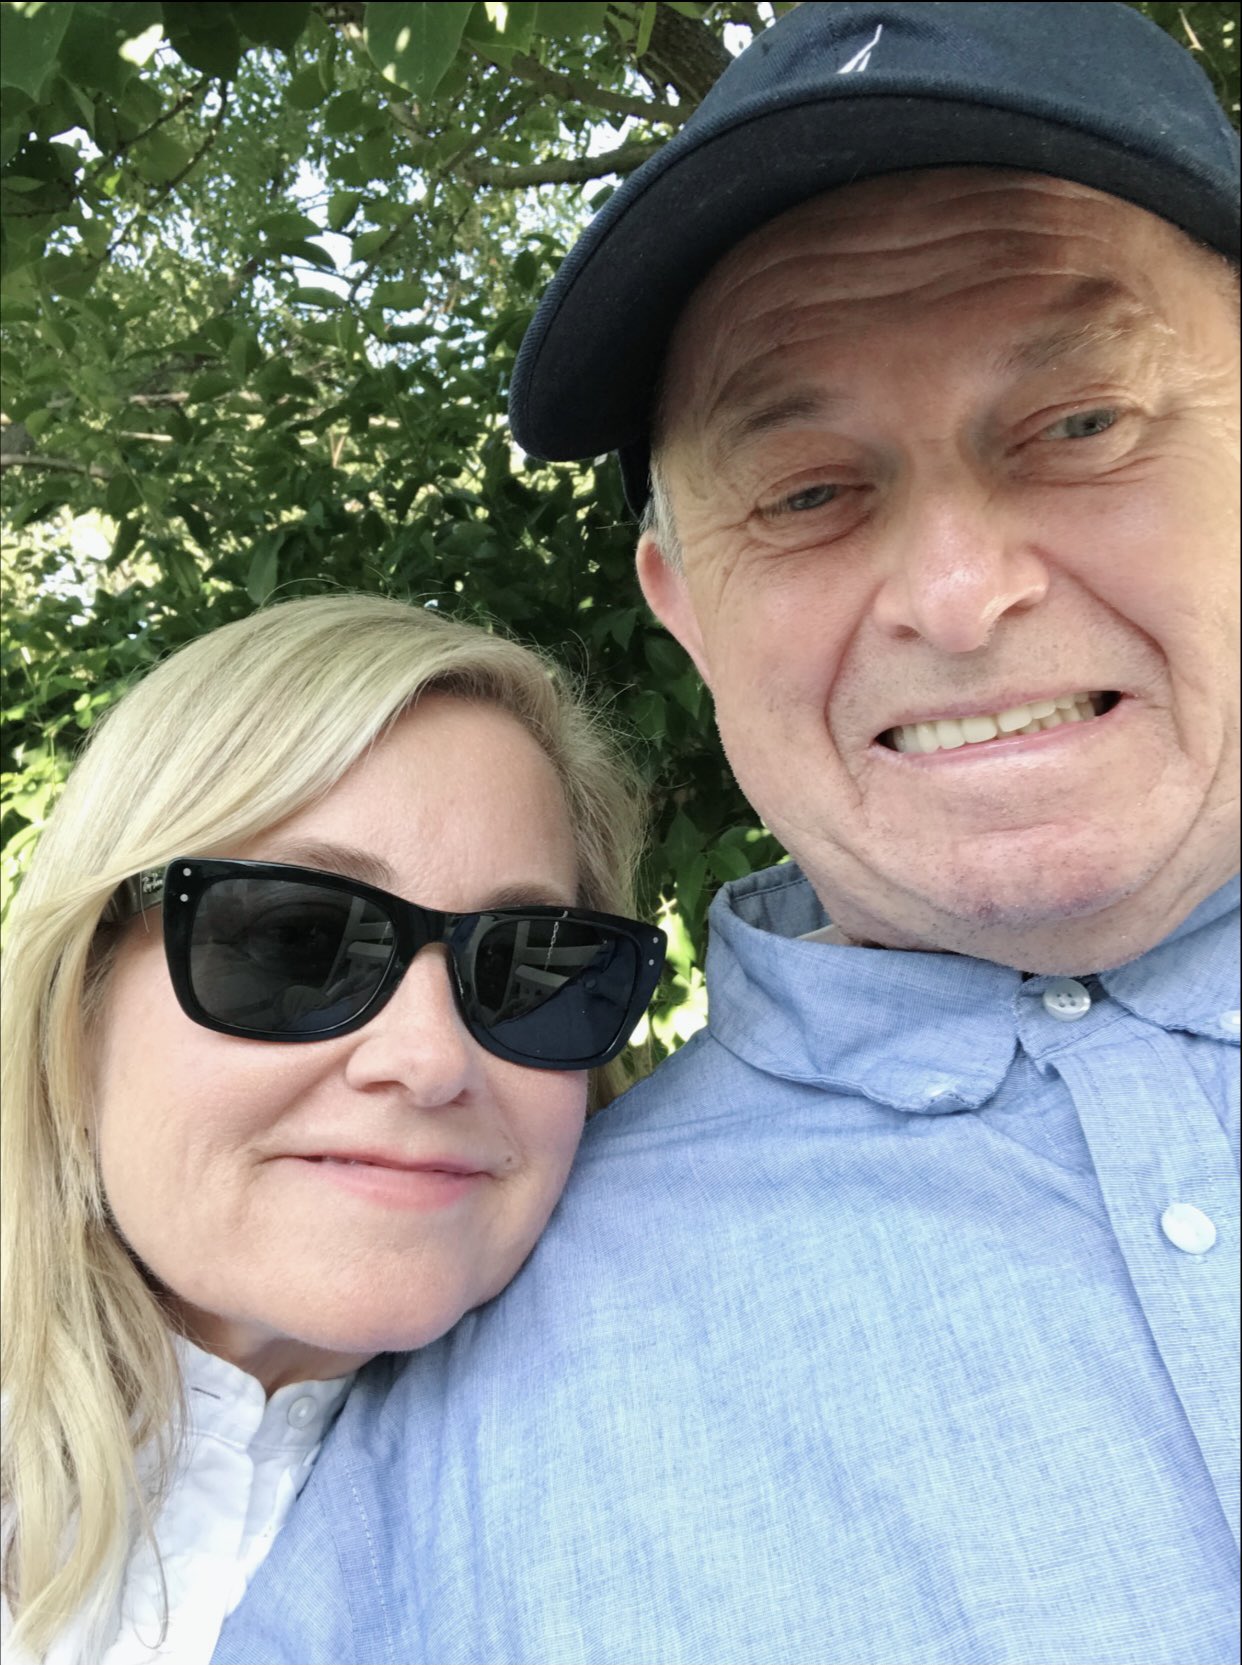 Maureen McCormick on X: "My brother Denny and his roommate who live in a  group home have just tested positive for #COVID . I would truly appreciate  your thoughts and prayers for